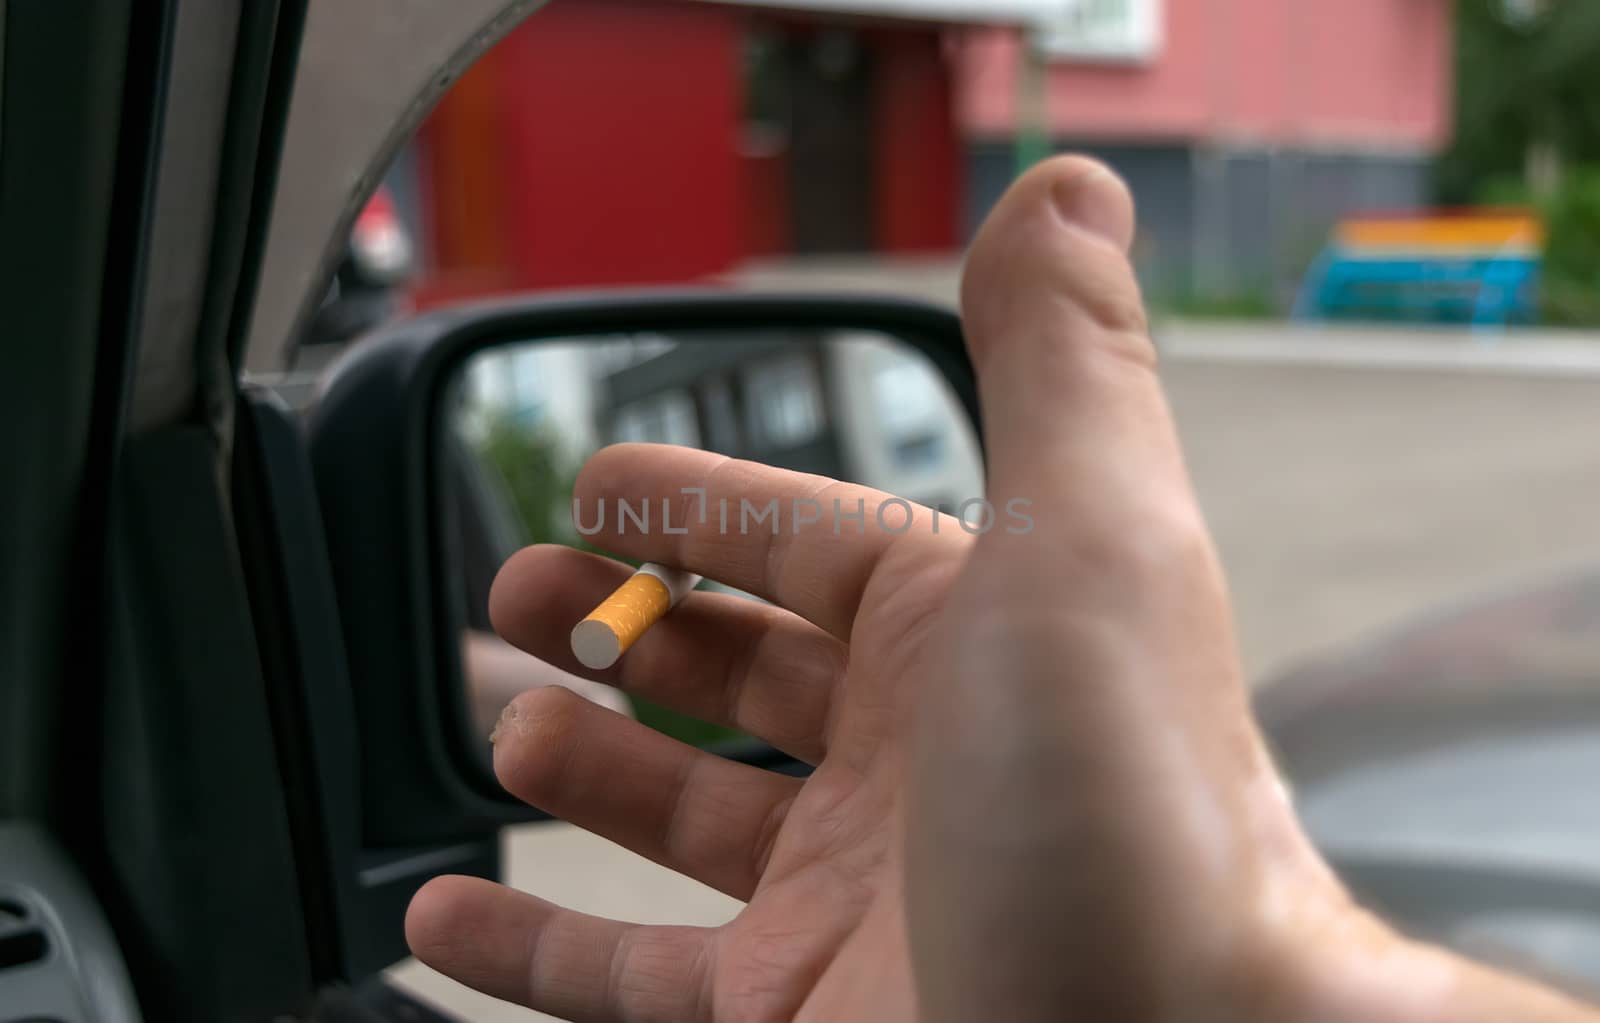 close-up of a cigarette in the hand of a man in the car, who watches the entrance door of the house